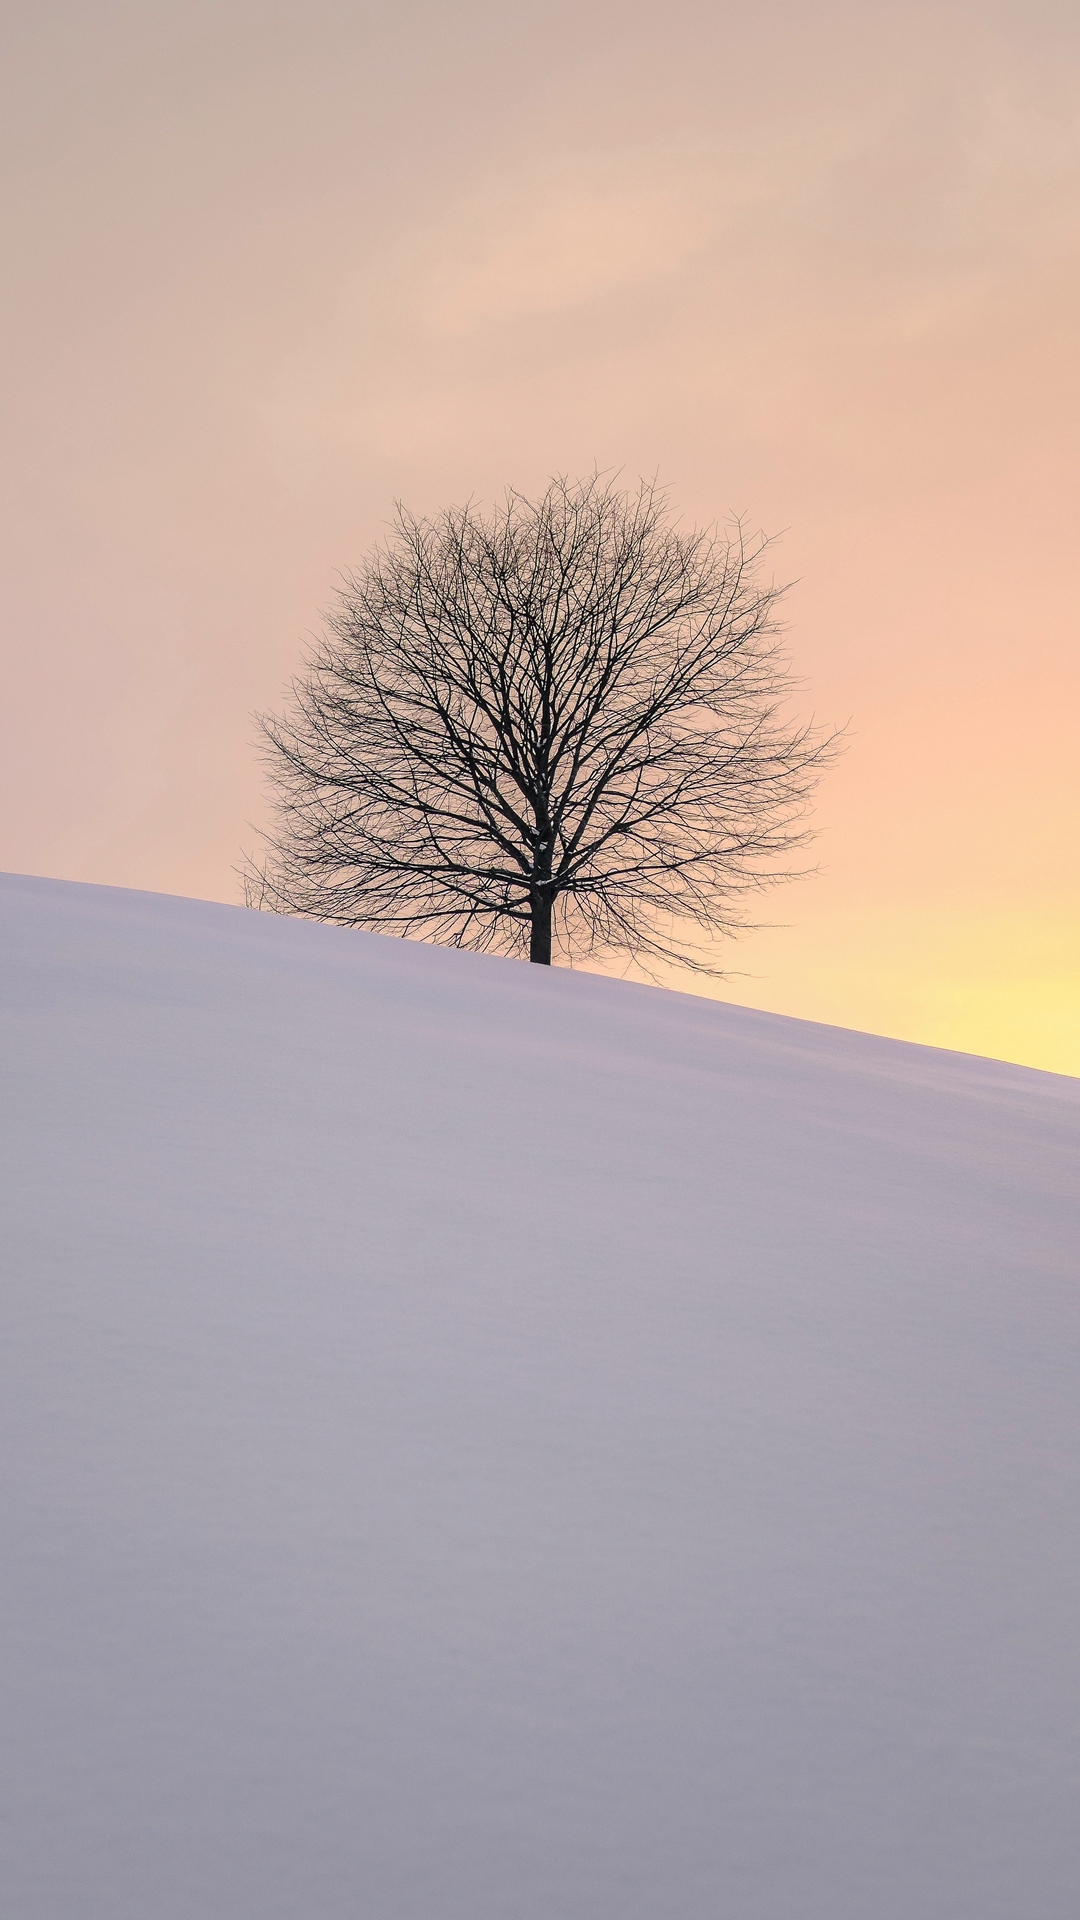 4 Minimalist Snow Texture Wallpapers for iPhone 6 Plus  iPad Air 2   OSXDaily